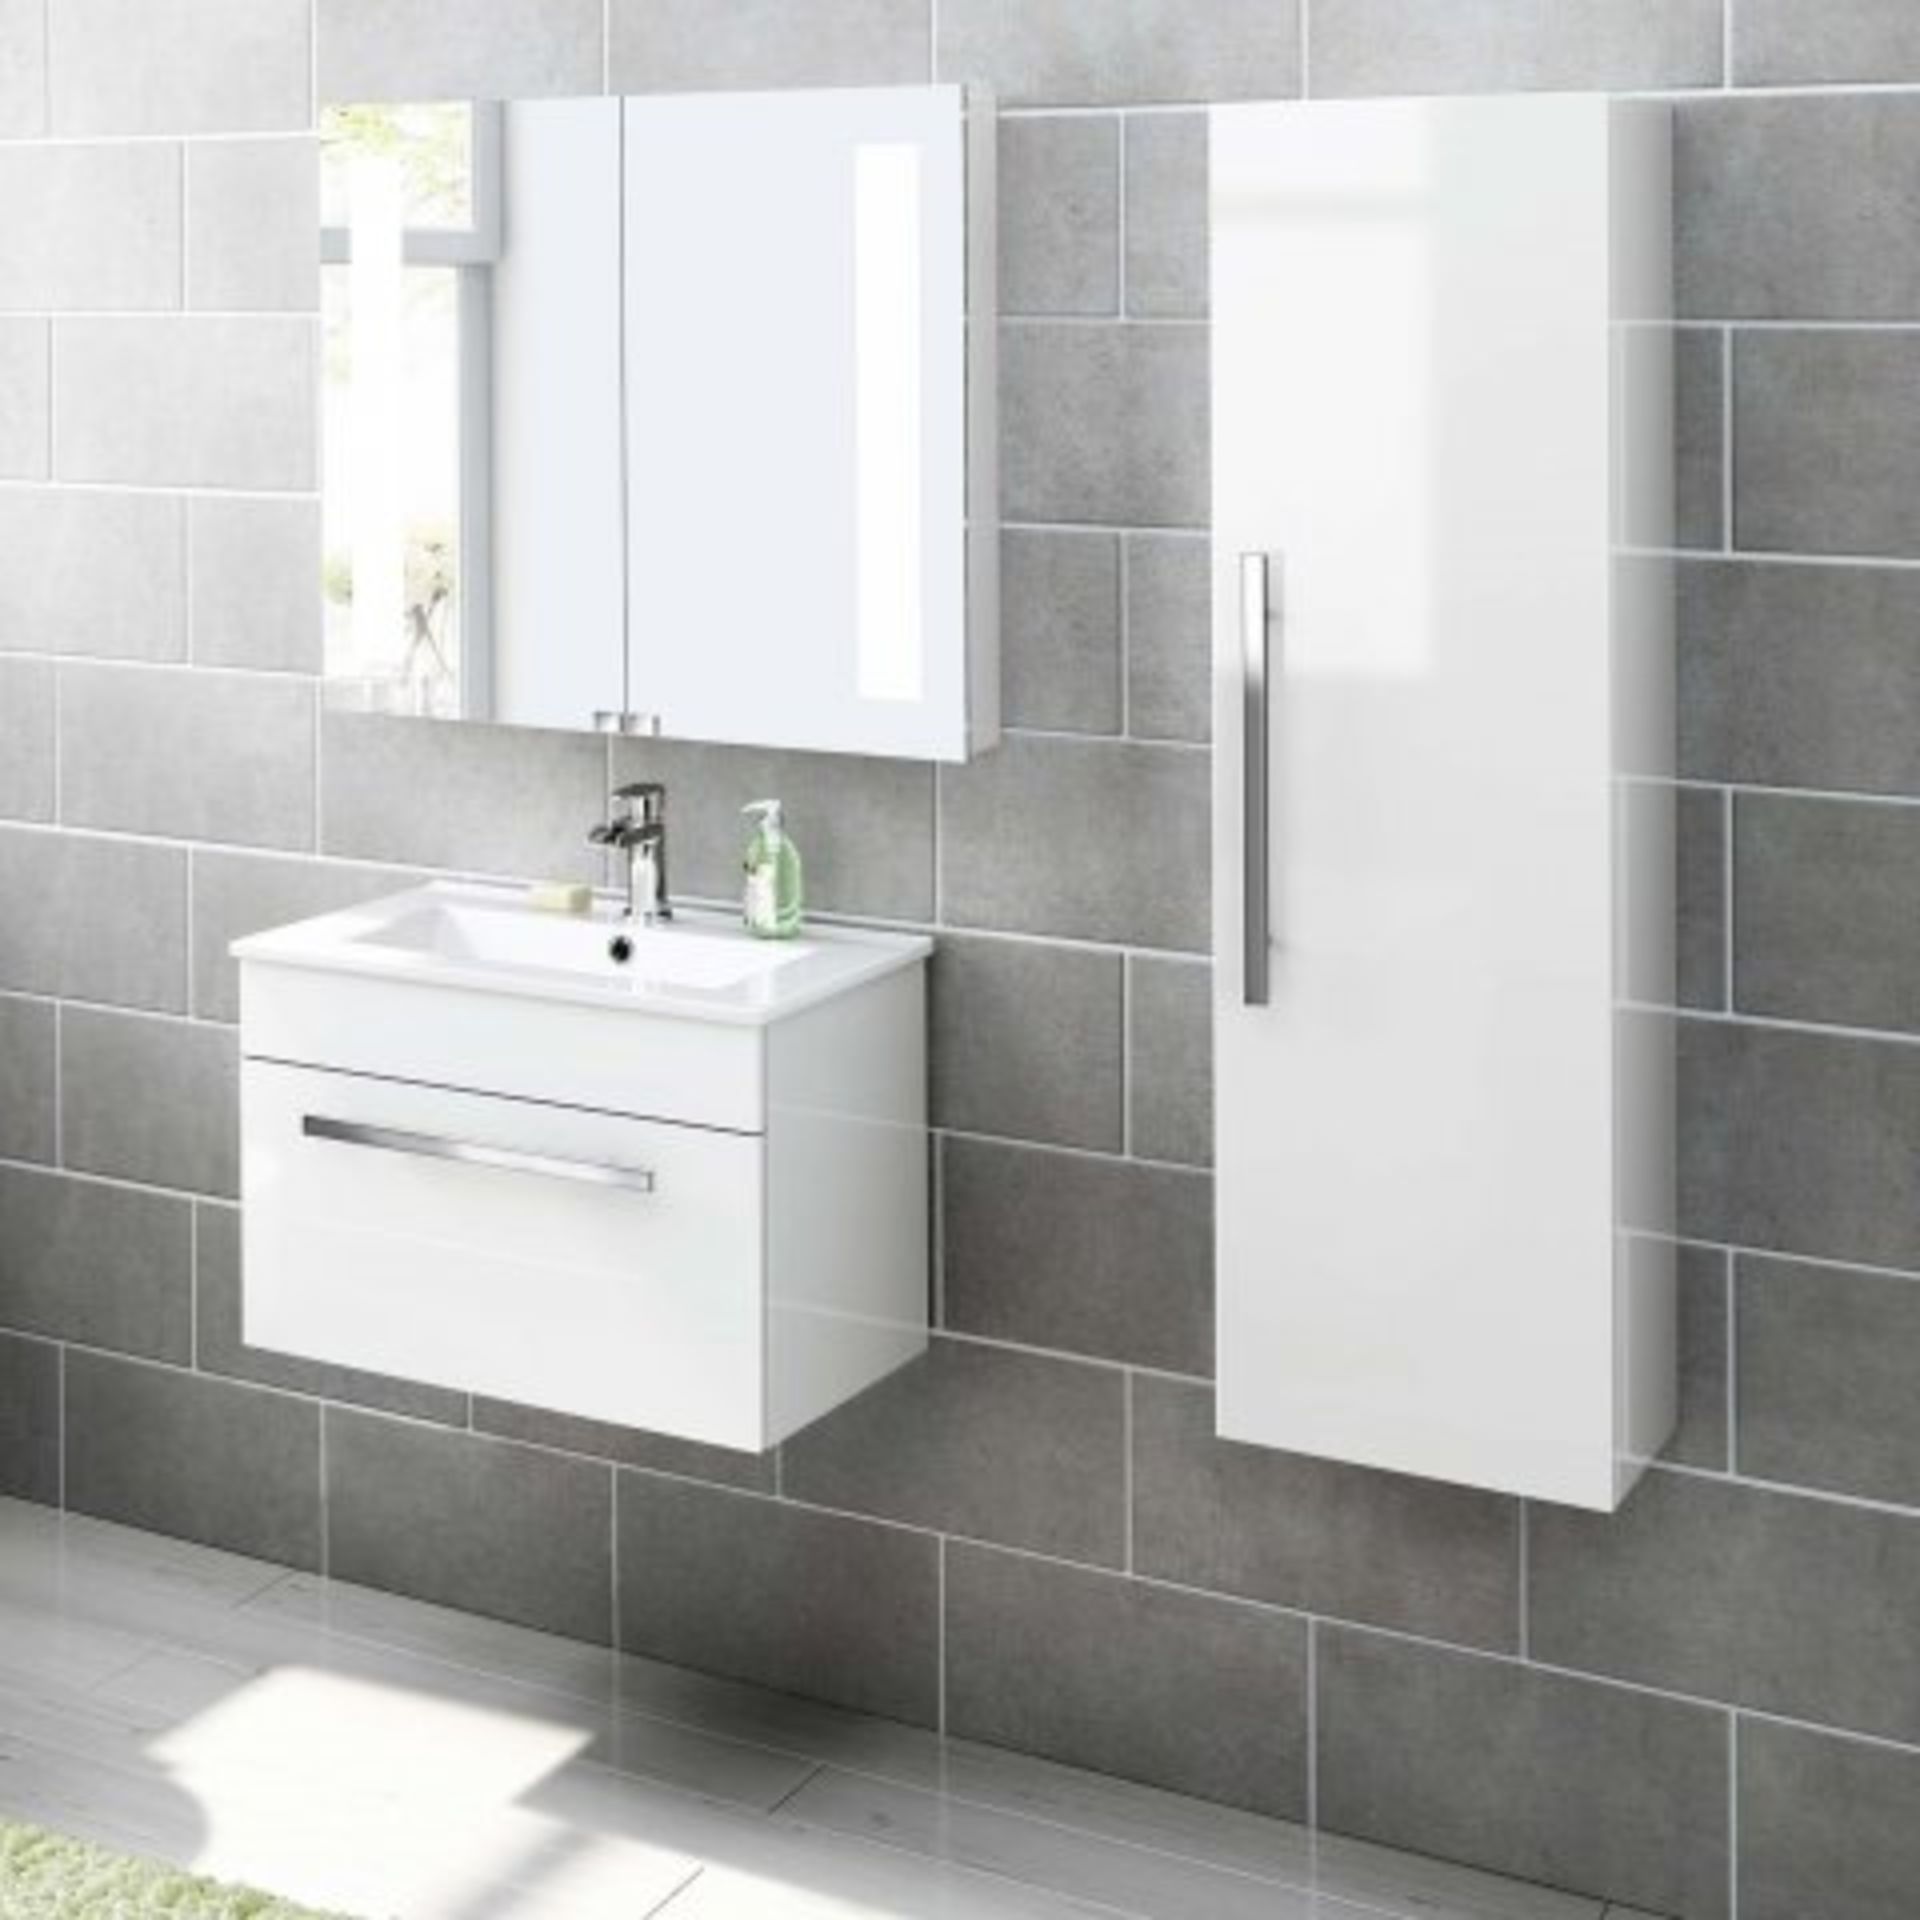 (K46) 1200mm Avon Gloss White Tall Storage Cabinet - Wall Hung. RRP £249.99. Contemporary Look - Image 2 of 5